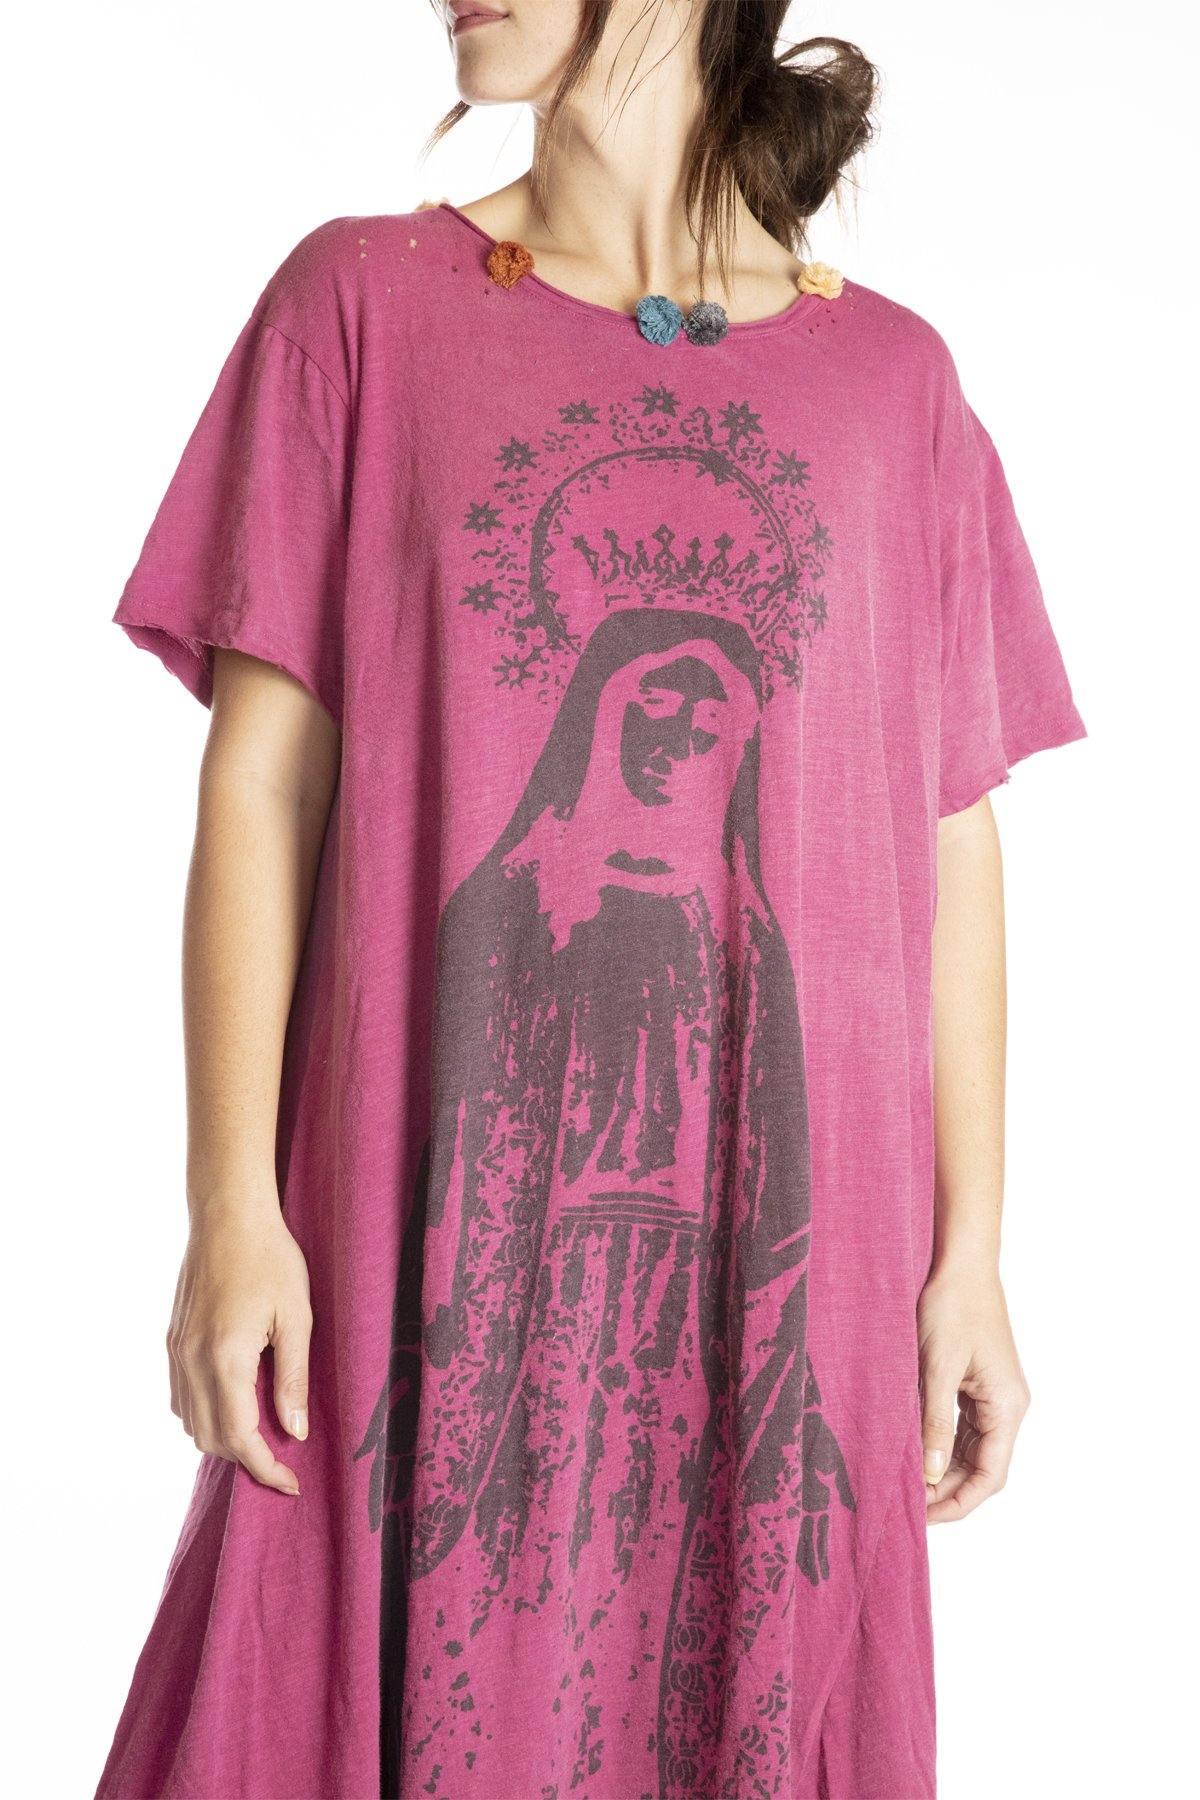 Crown Of Our Lady T Dress - Magnolia Pearl Clothing